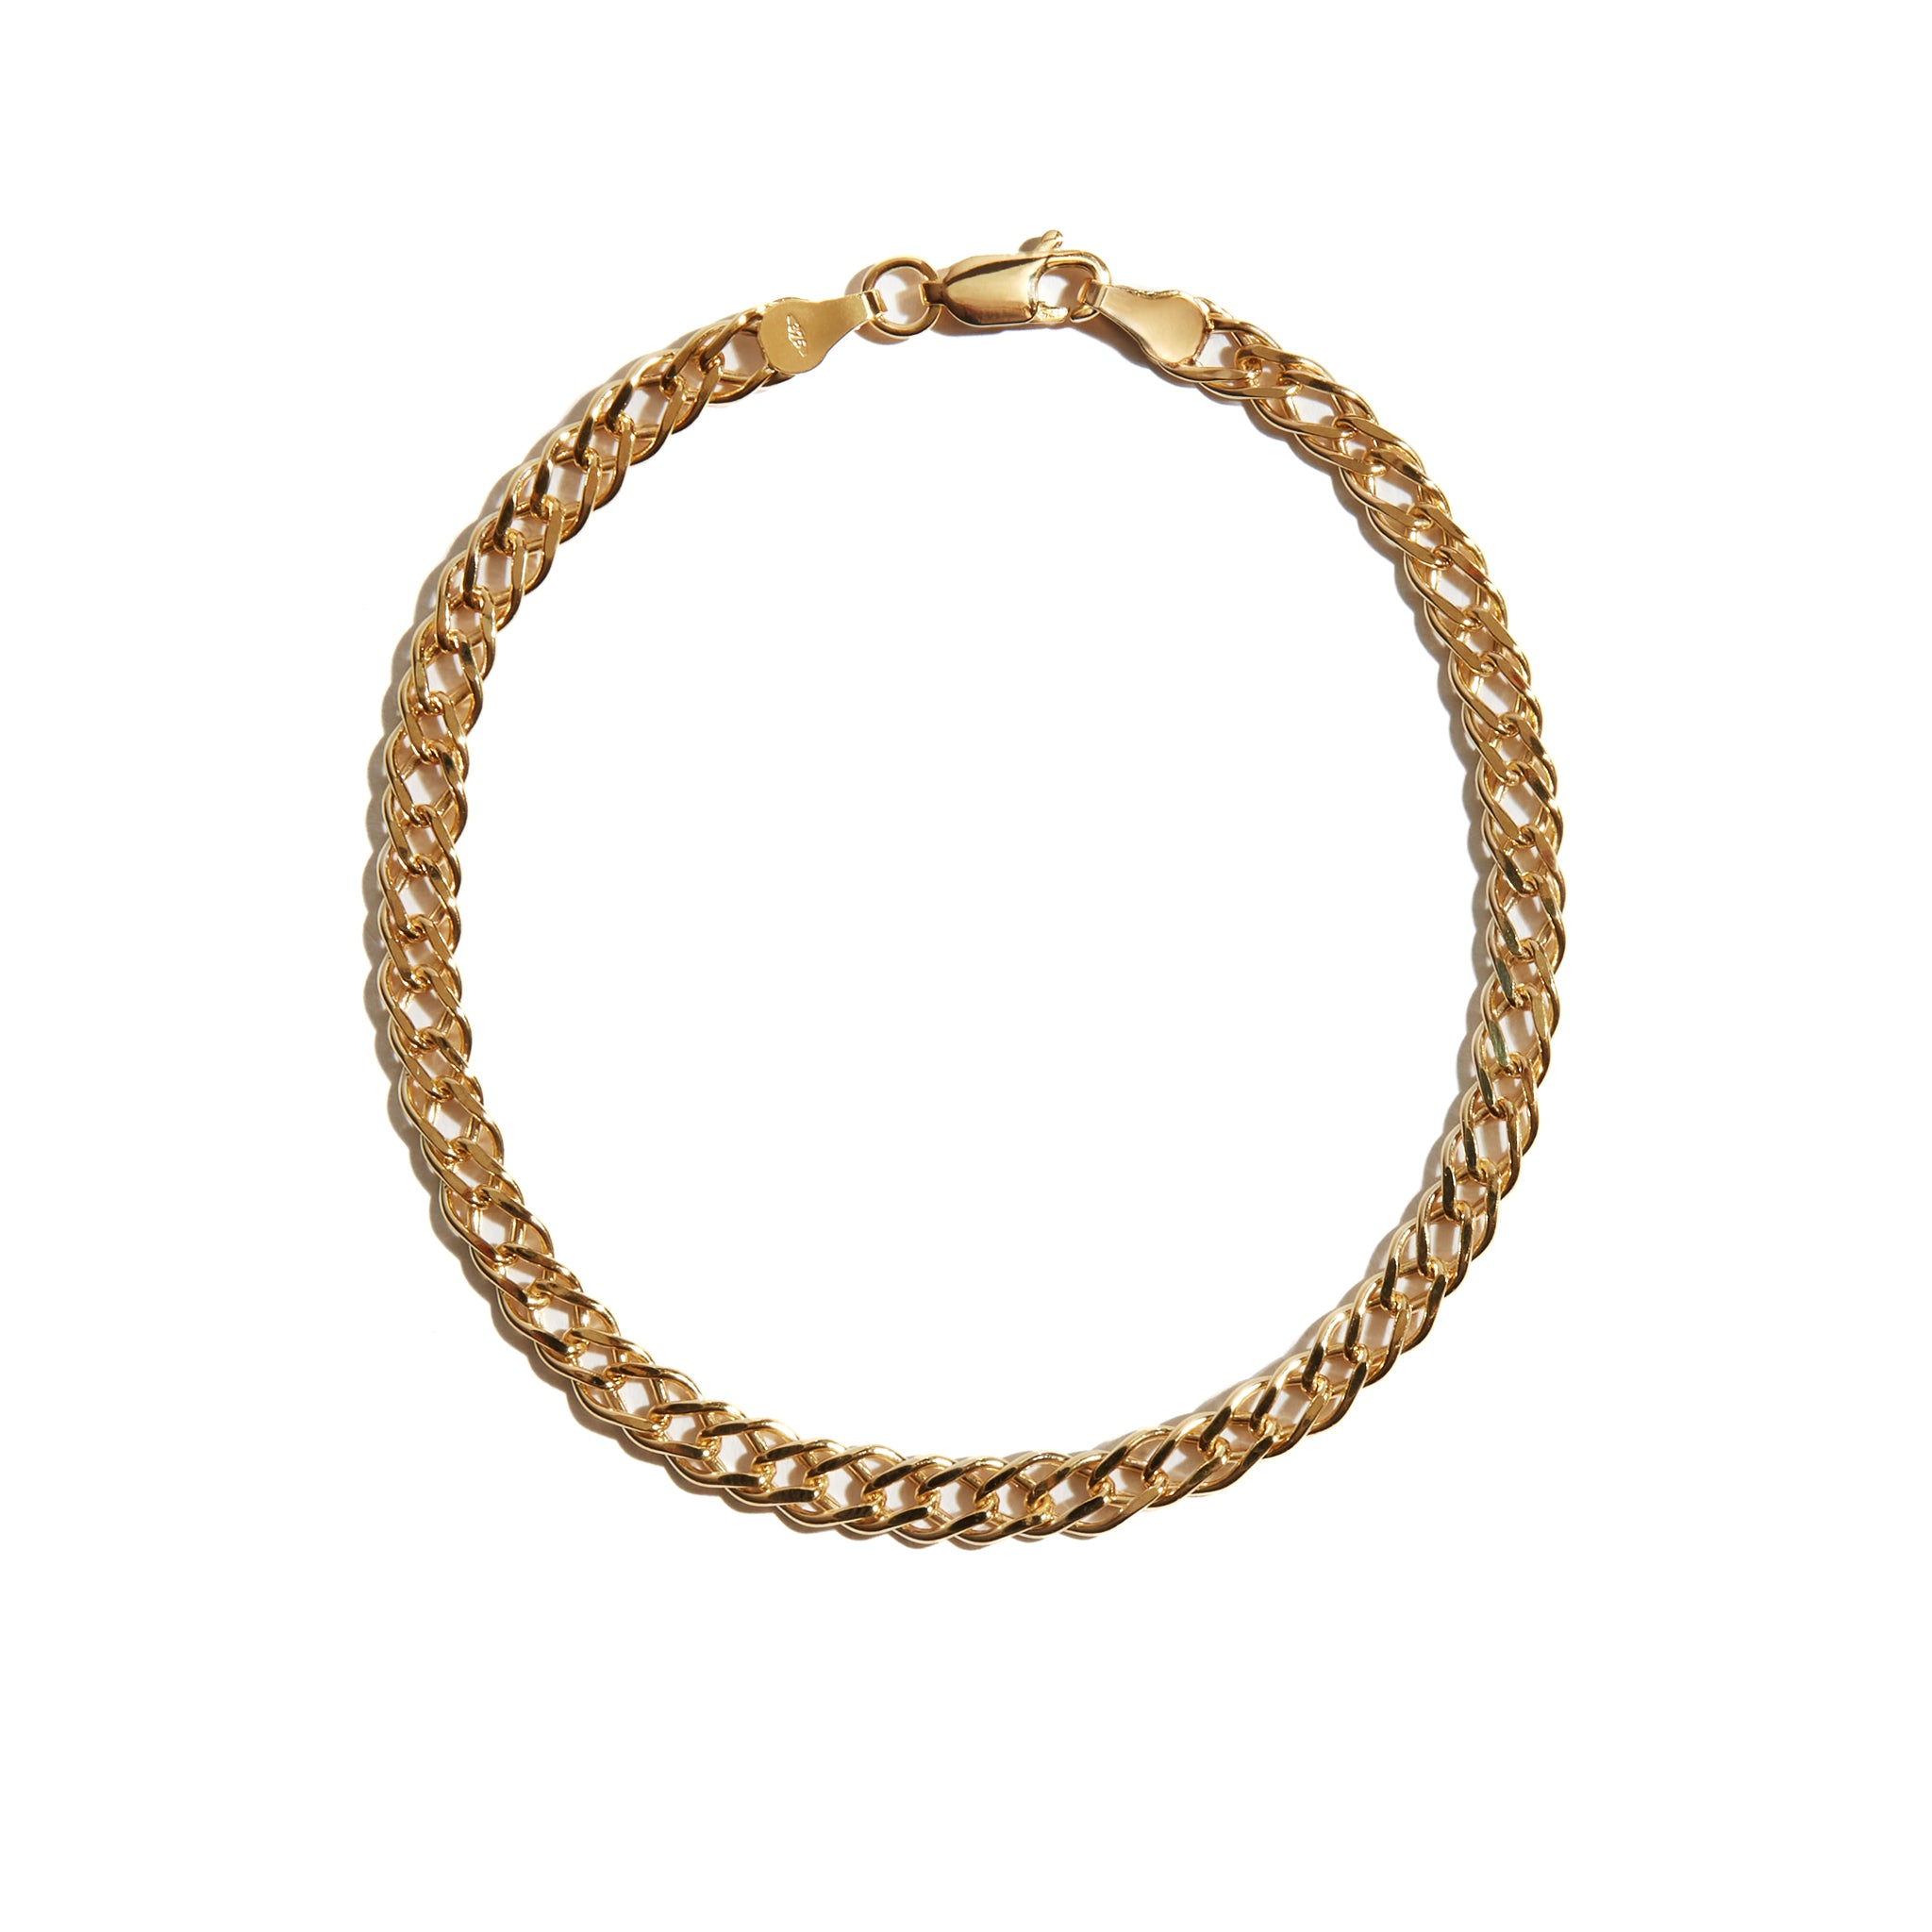 A stunning diamond-cut double curb bracelet made from 9 Carat Gold, adding sparkle and elegance to any wrist.